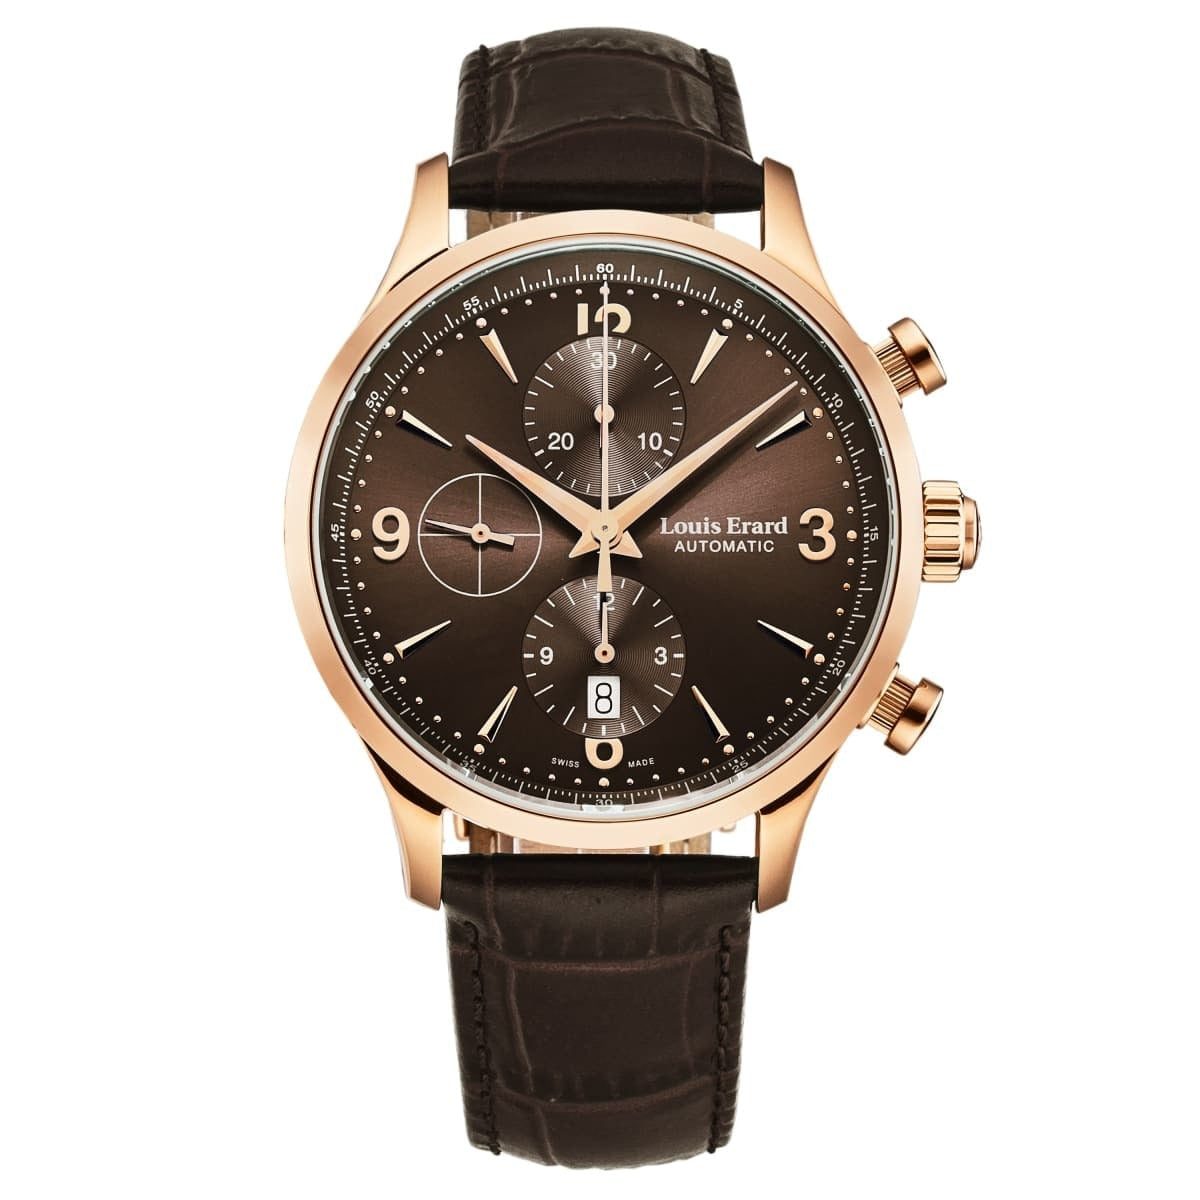 A Louis Erard Men's '1931' Chronograph Brown Dial Brown Leather Strap Automatic Watch 78225PR16.BRC03 with brown leather straps and a brown dial.